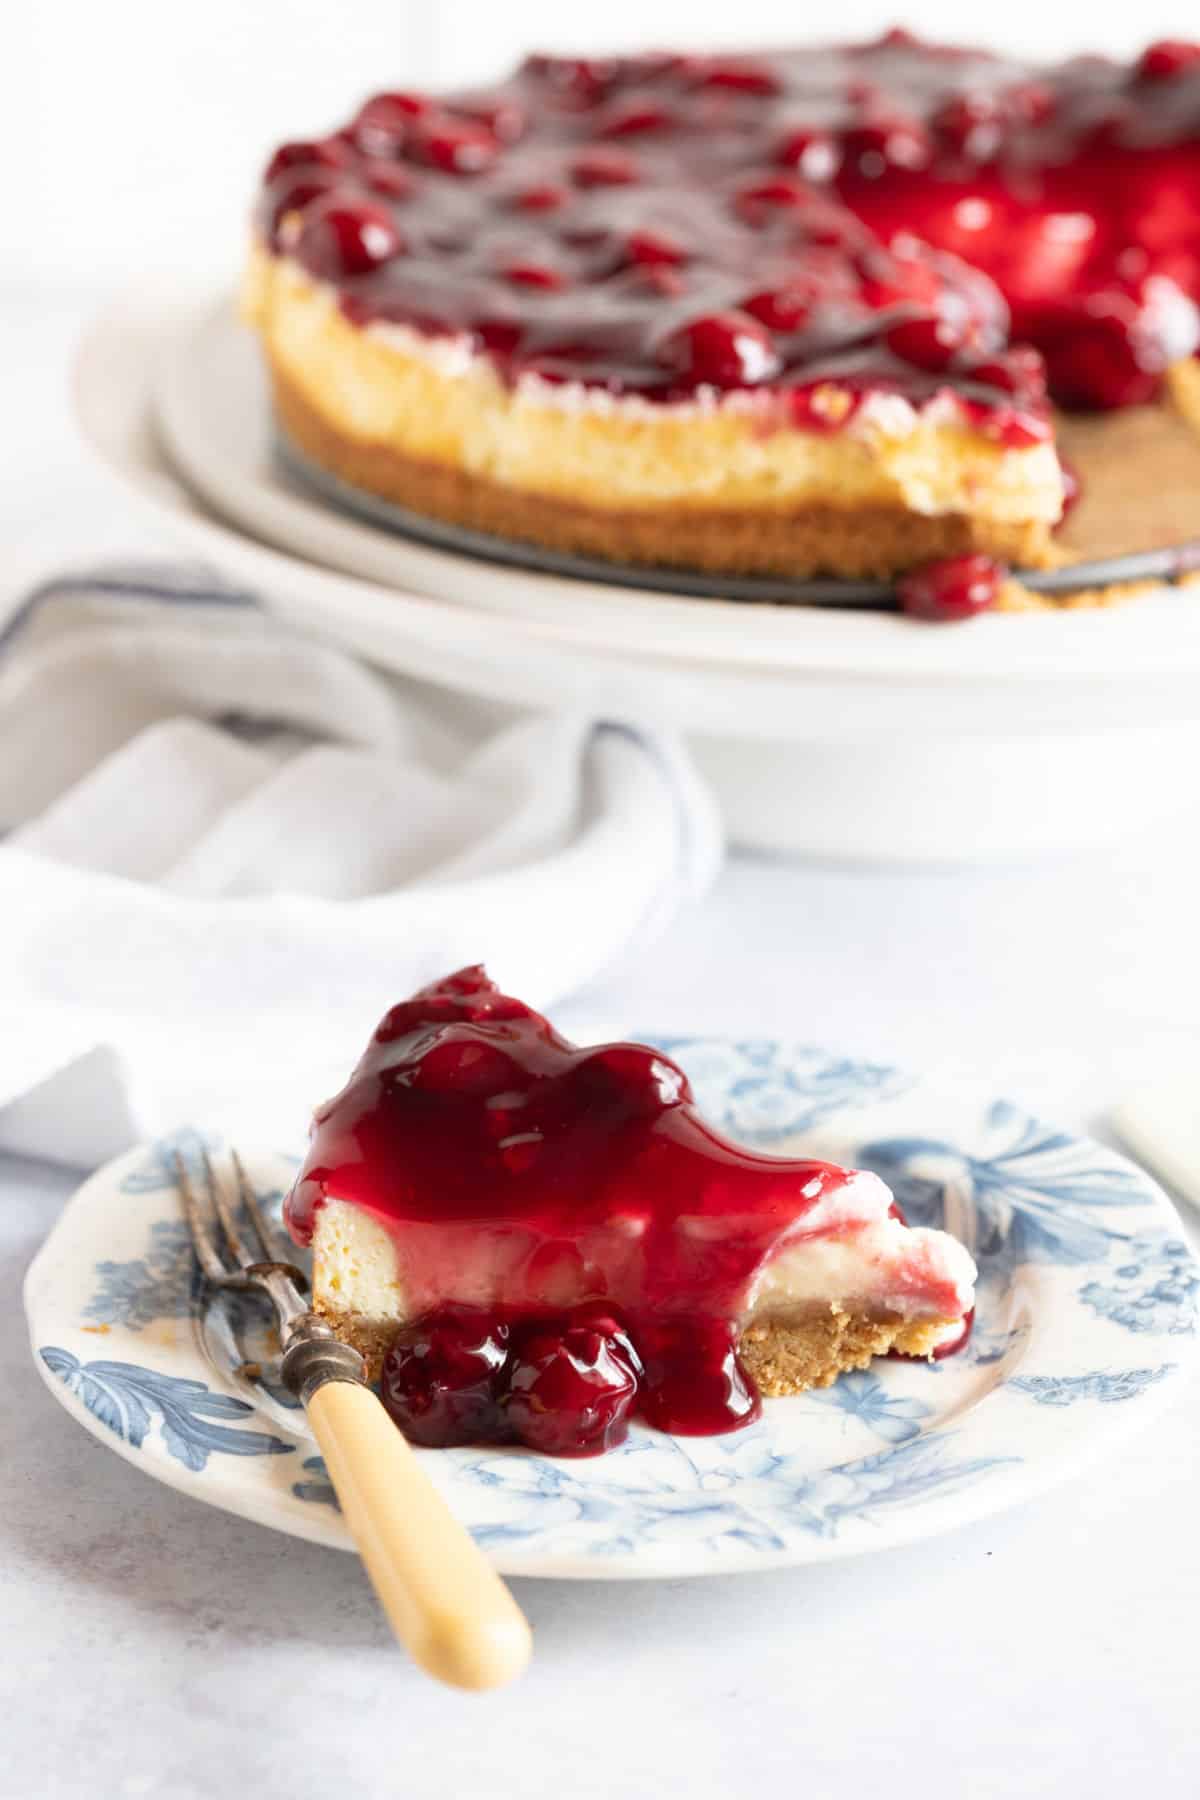 A slice of cherry cheesecake on a plate.